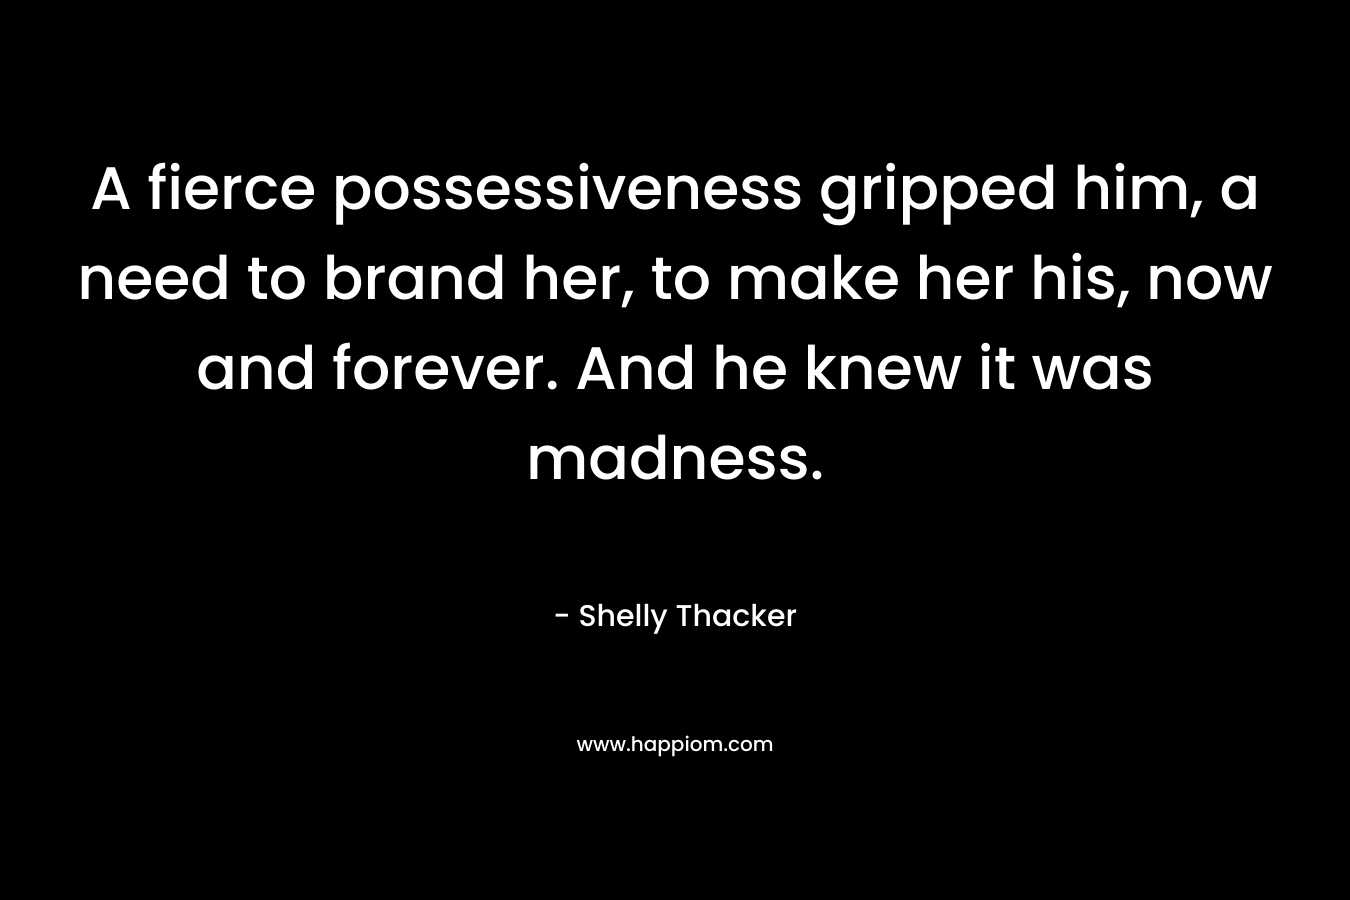 A fierce possessiveness gripped him, a need to brand her, to make her his, now and forever. And he knew it was madness. – Shelly Thacker